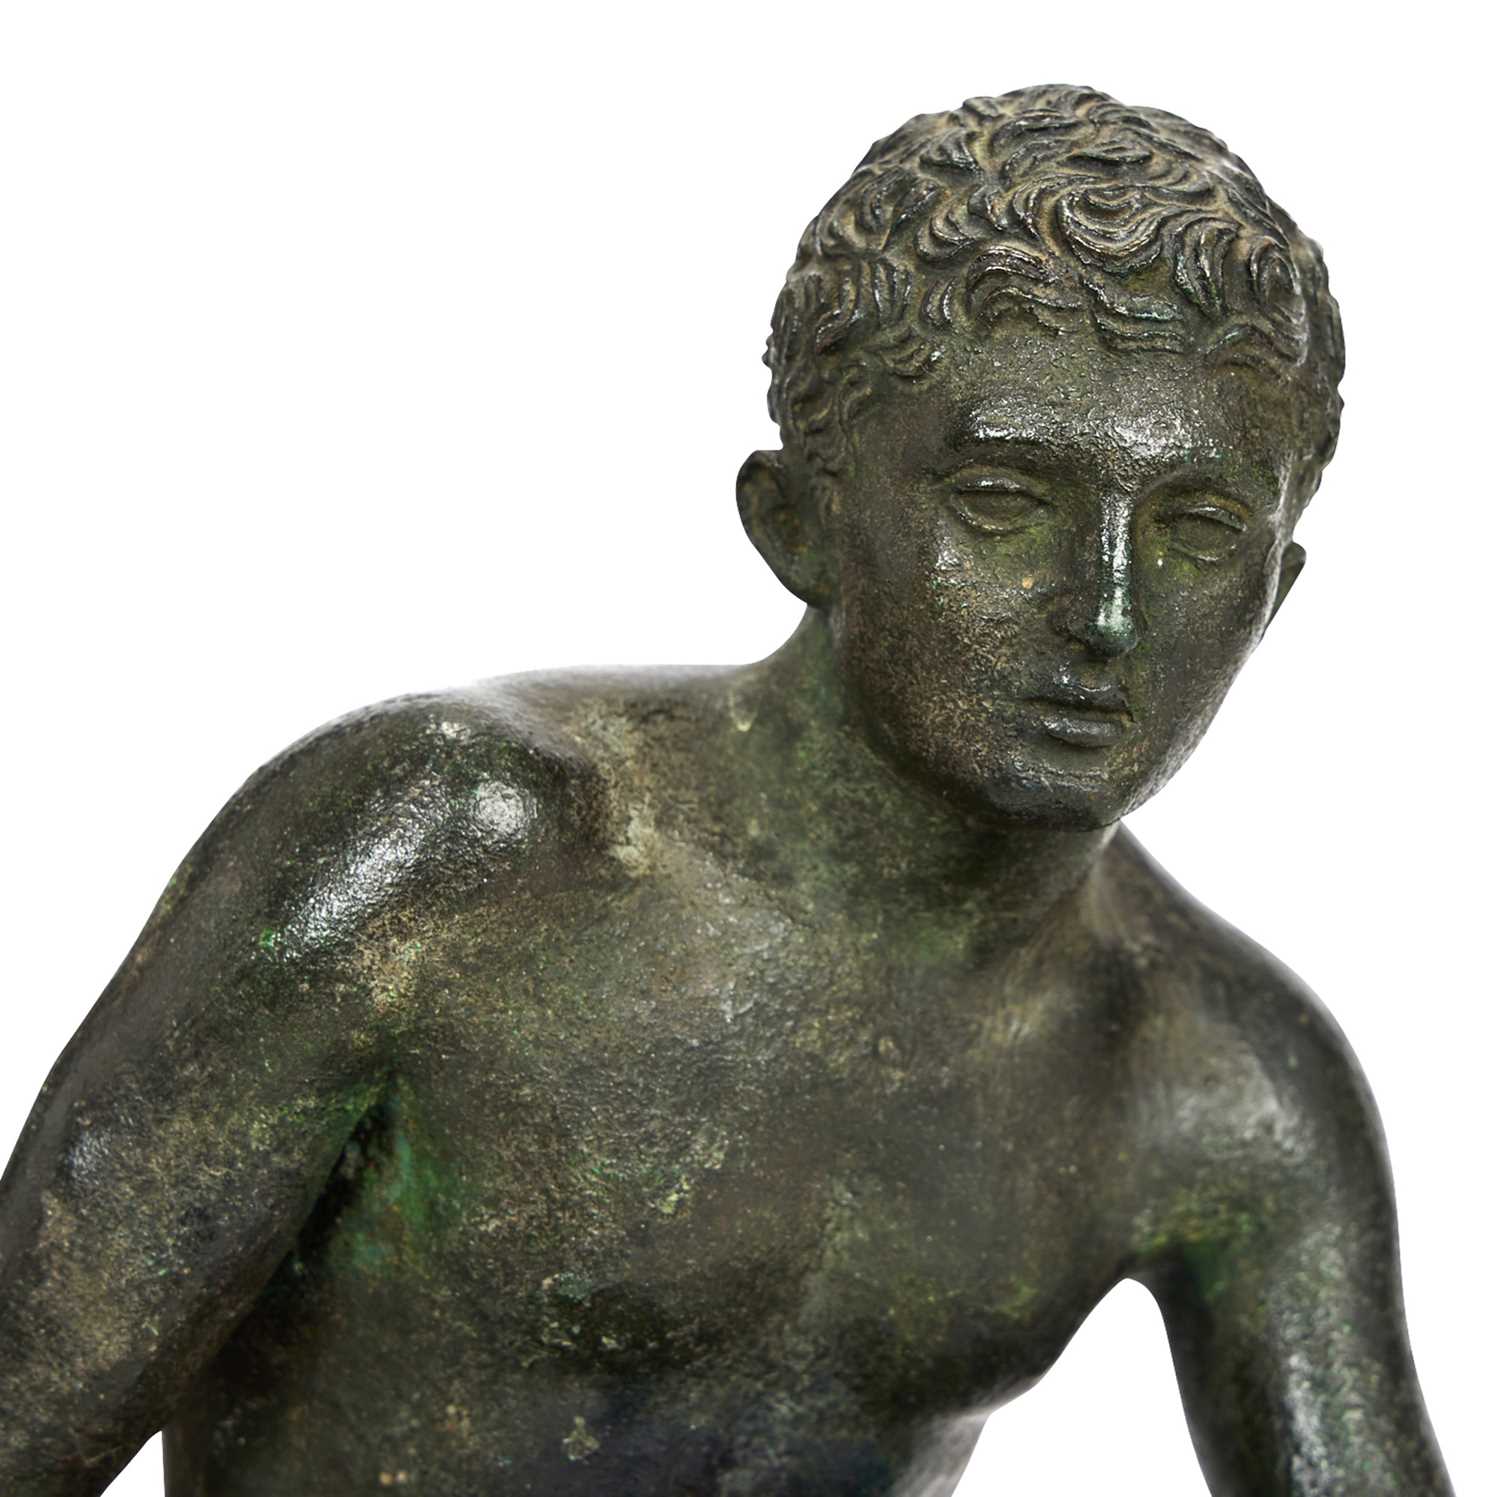 GIORGIO SOMMER, NAPOLI: A 19TH CENTURY BRONZE FIGURE OF THE SEATED MERCURY - Image 3 of 3